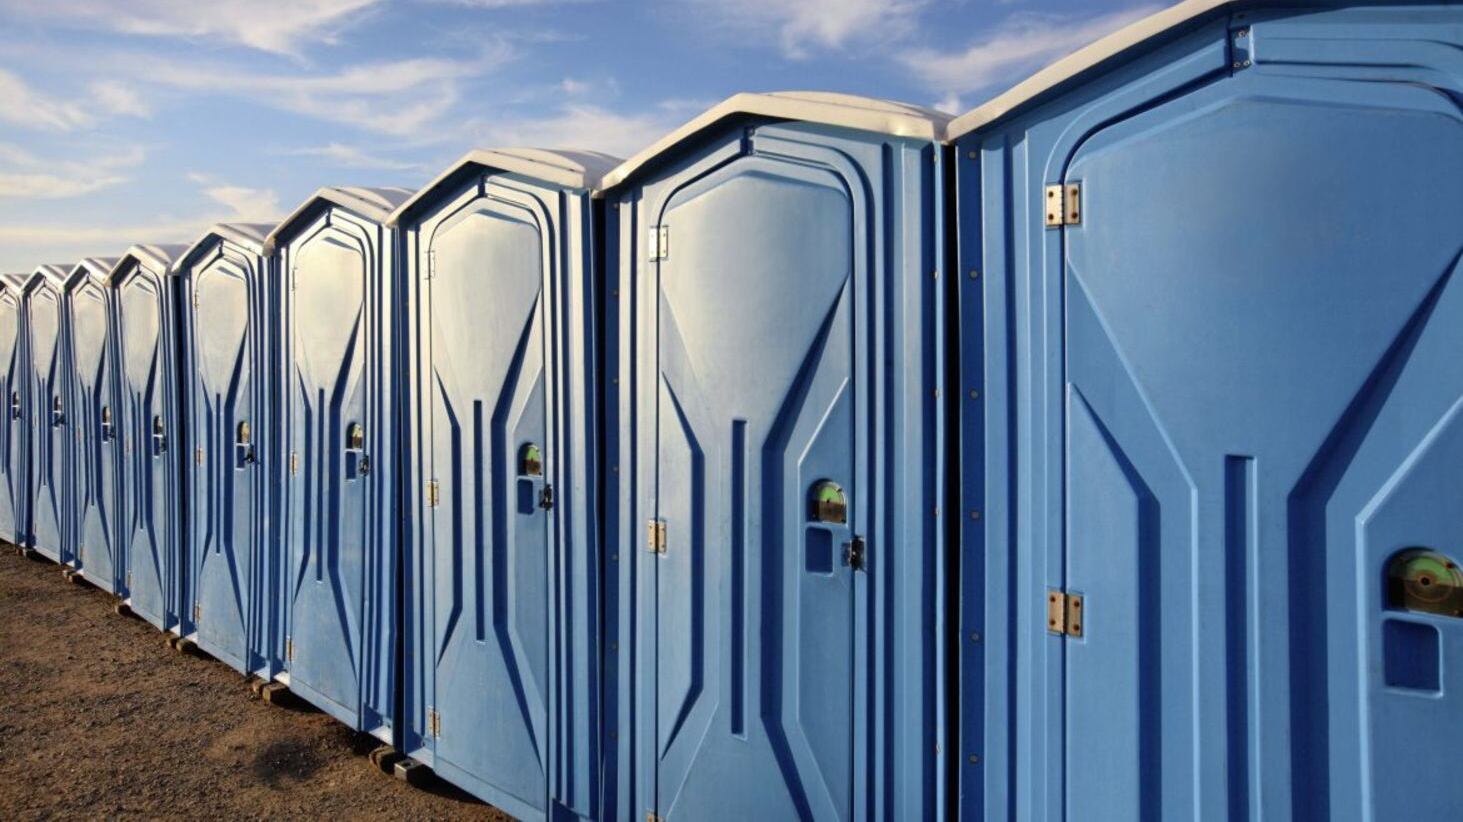 Armagh, Banbridge and Craigavon Borough Council spent &pound;54,833 on the hire of portable toilets between May 2017 and August 2018 